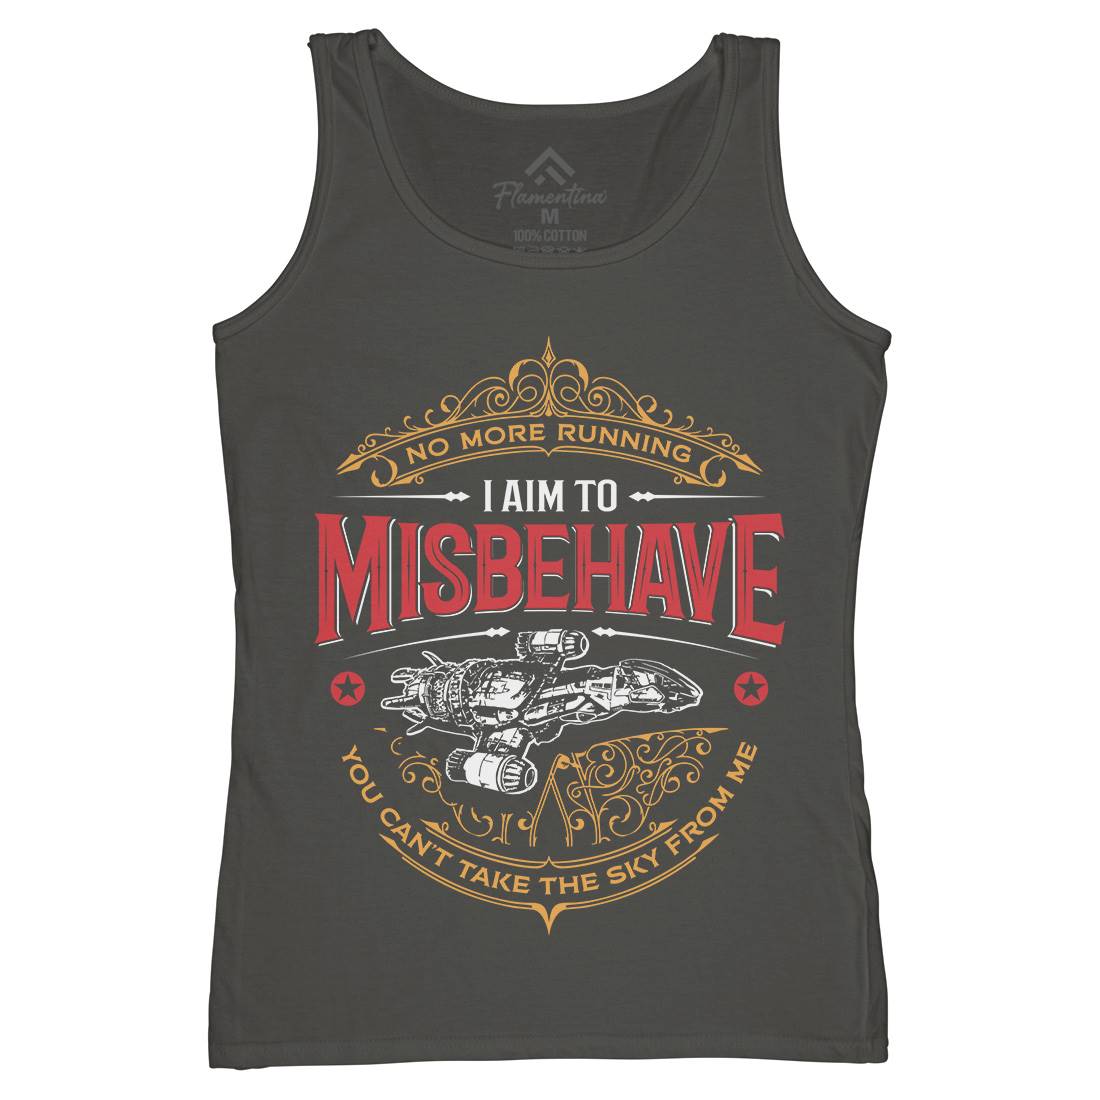 I Aim To Misbehave Womens Organic Tank Top Vest Space D435